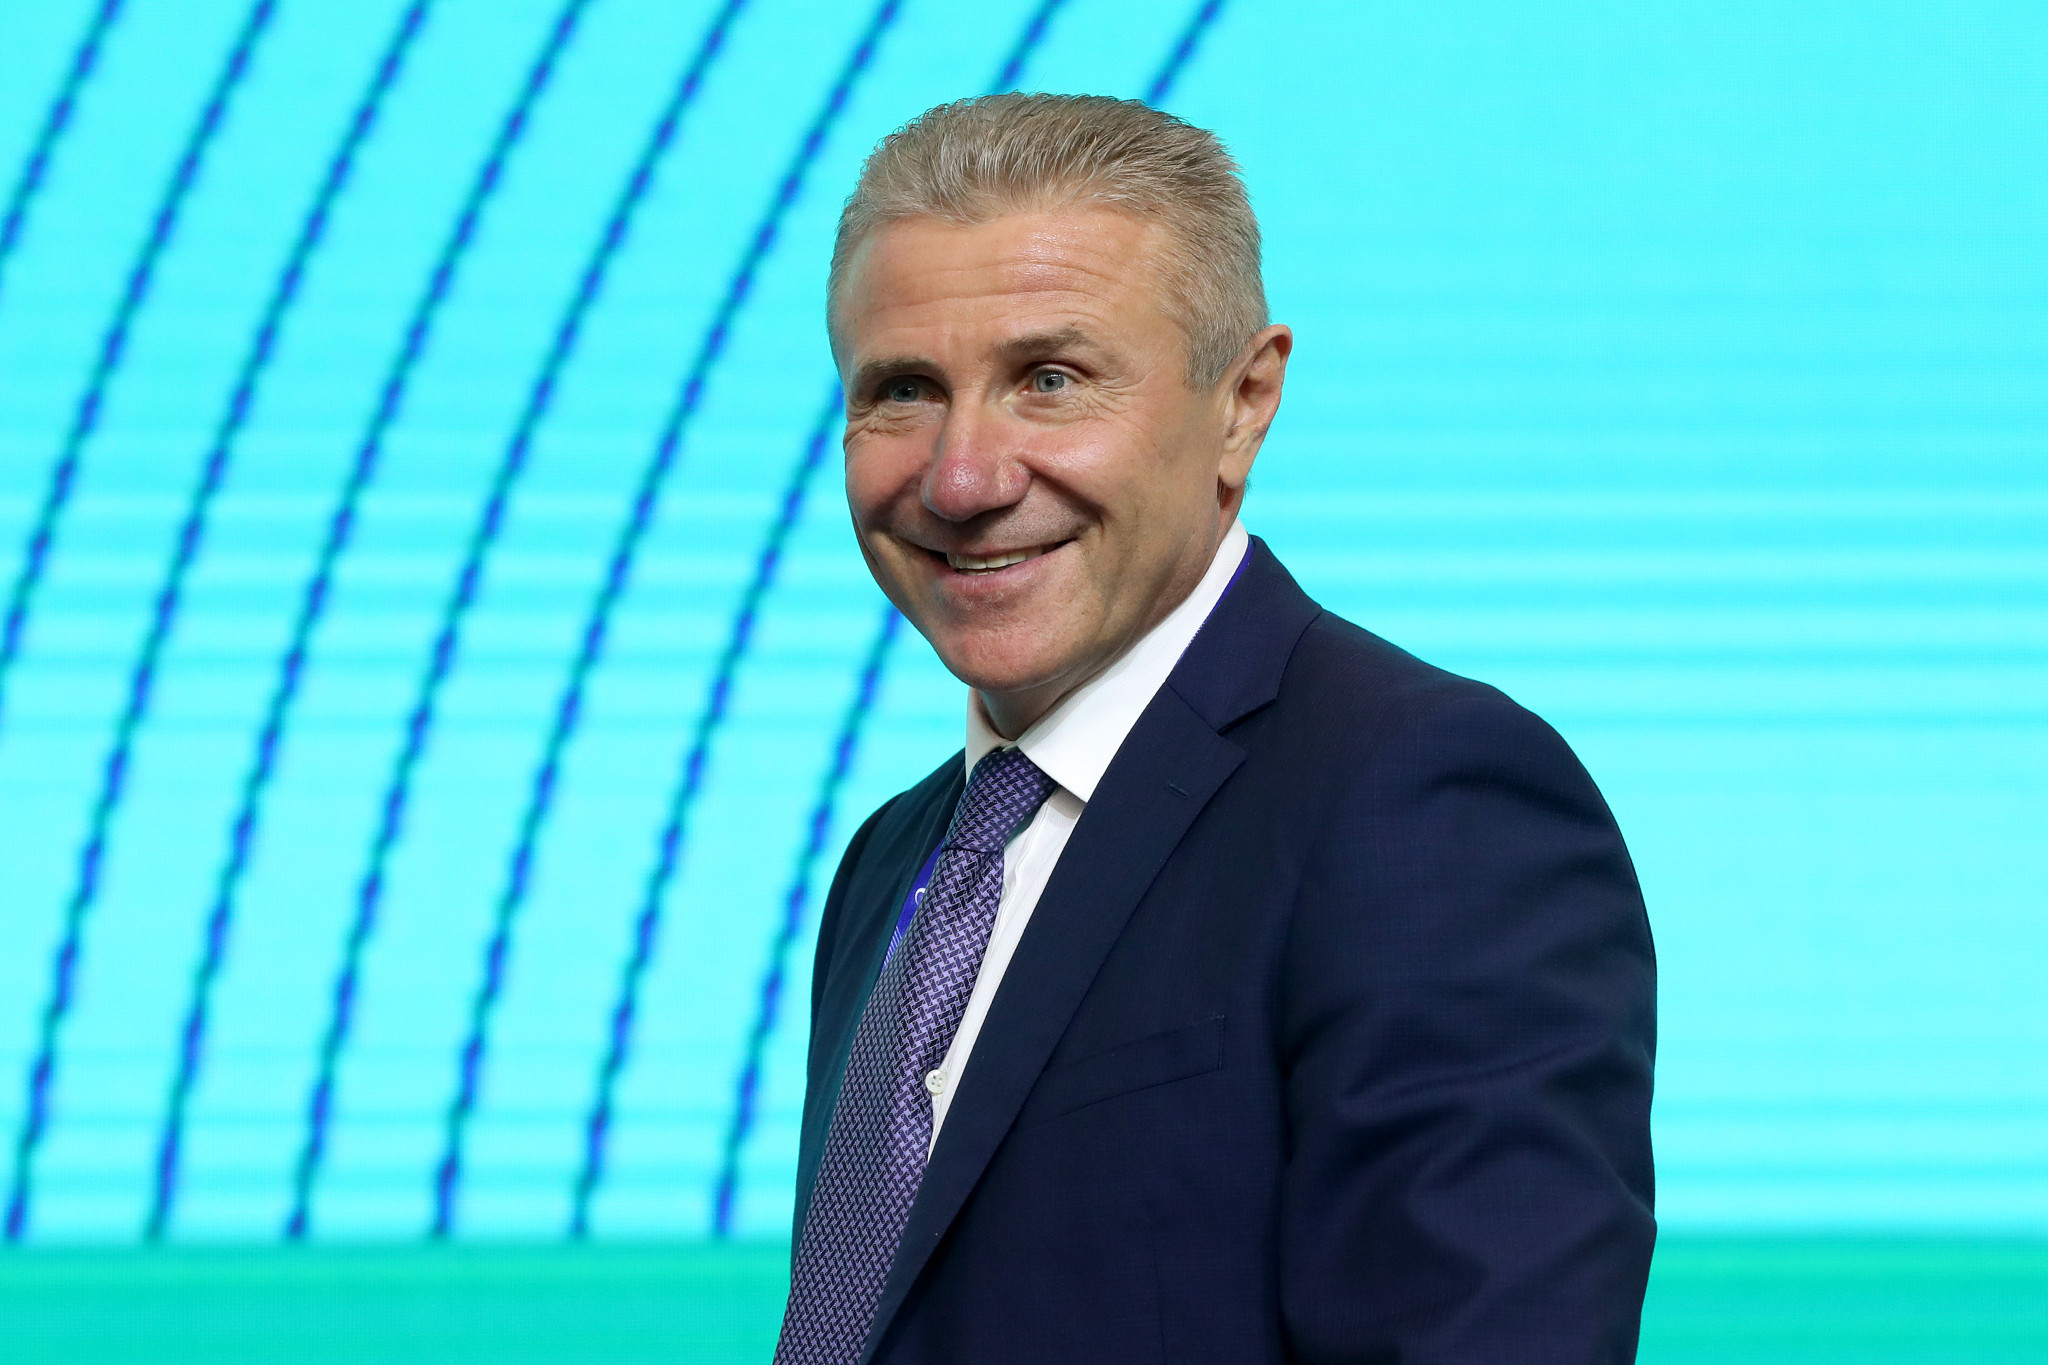 National Olympic Committee of Ukraine President Sergey Bubka admitted President Volodymyr Zelenskyy was keen to bring a Winter Olympics to the country ©Getty Images